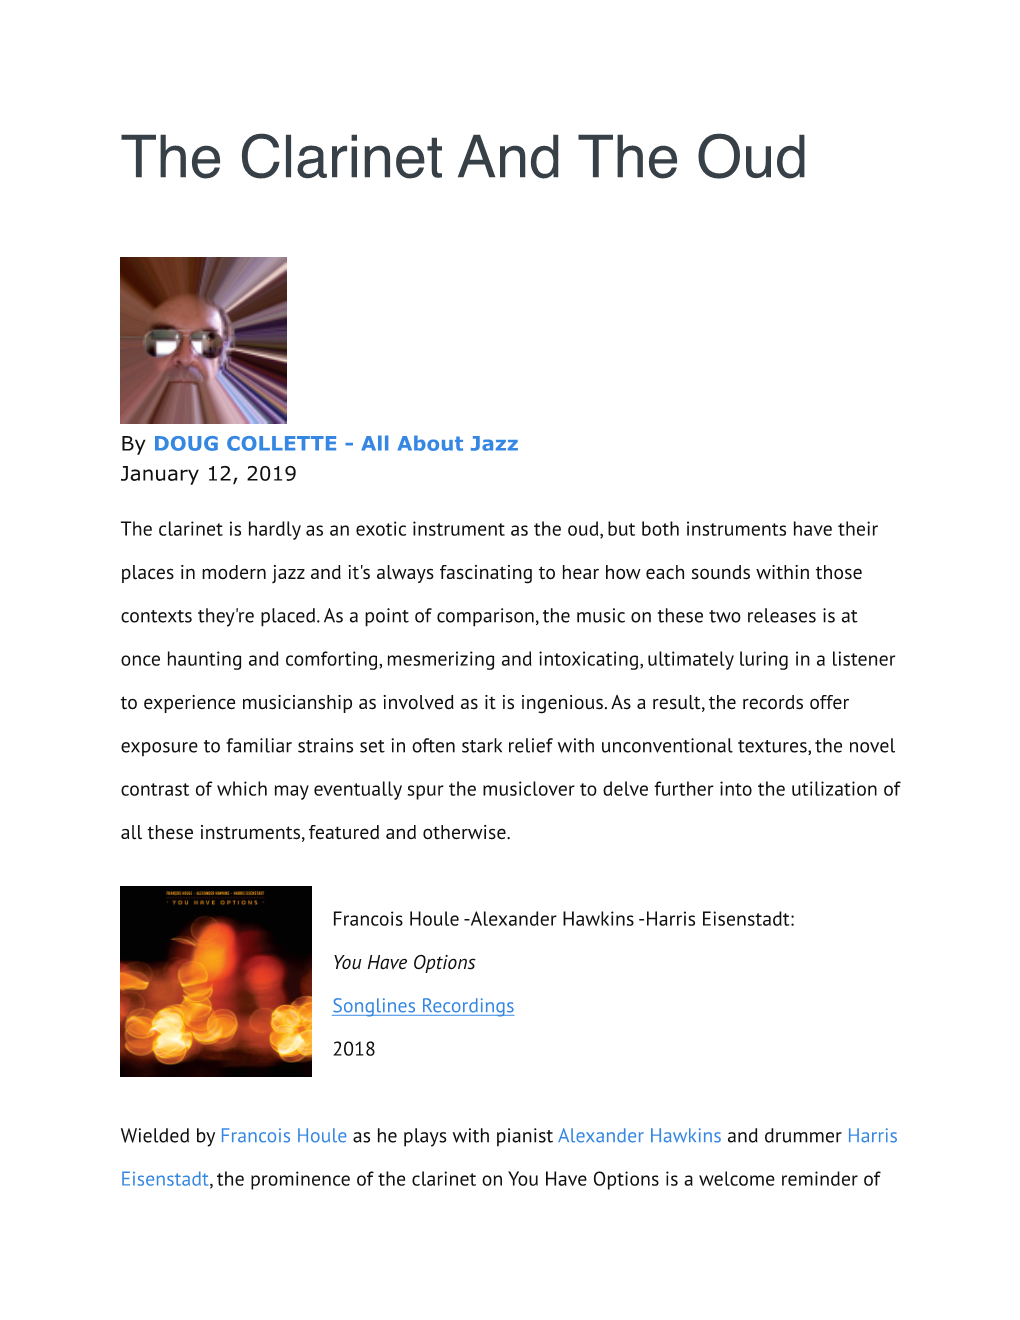 The Clarinet and the Oud